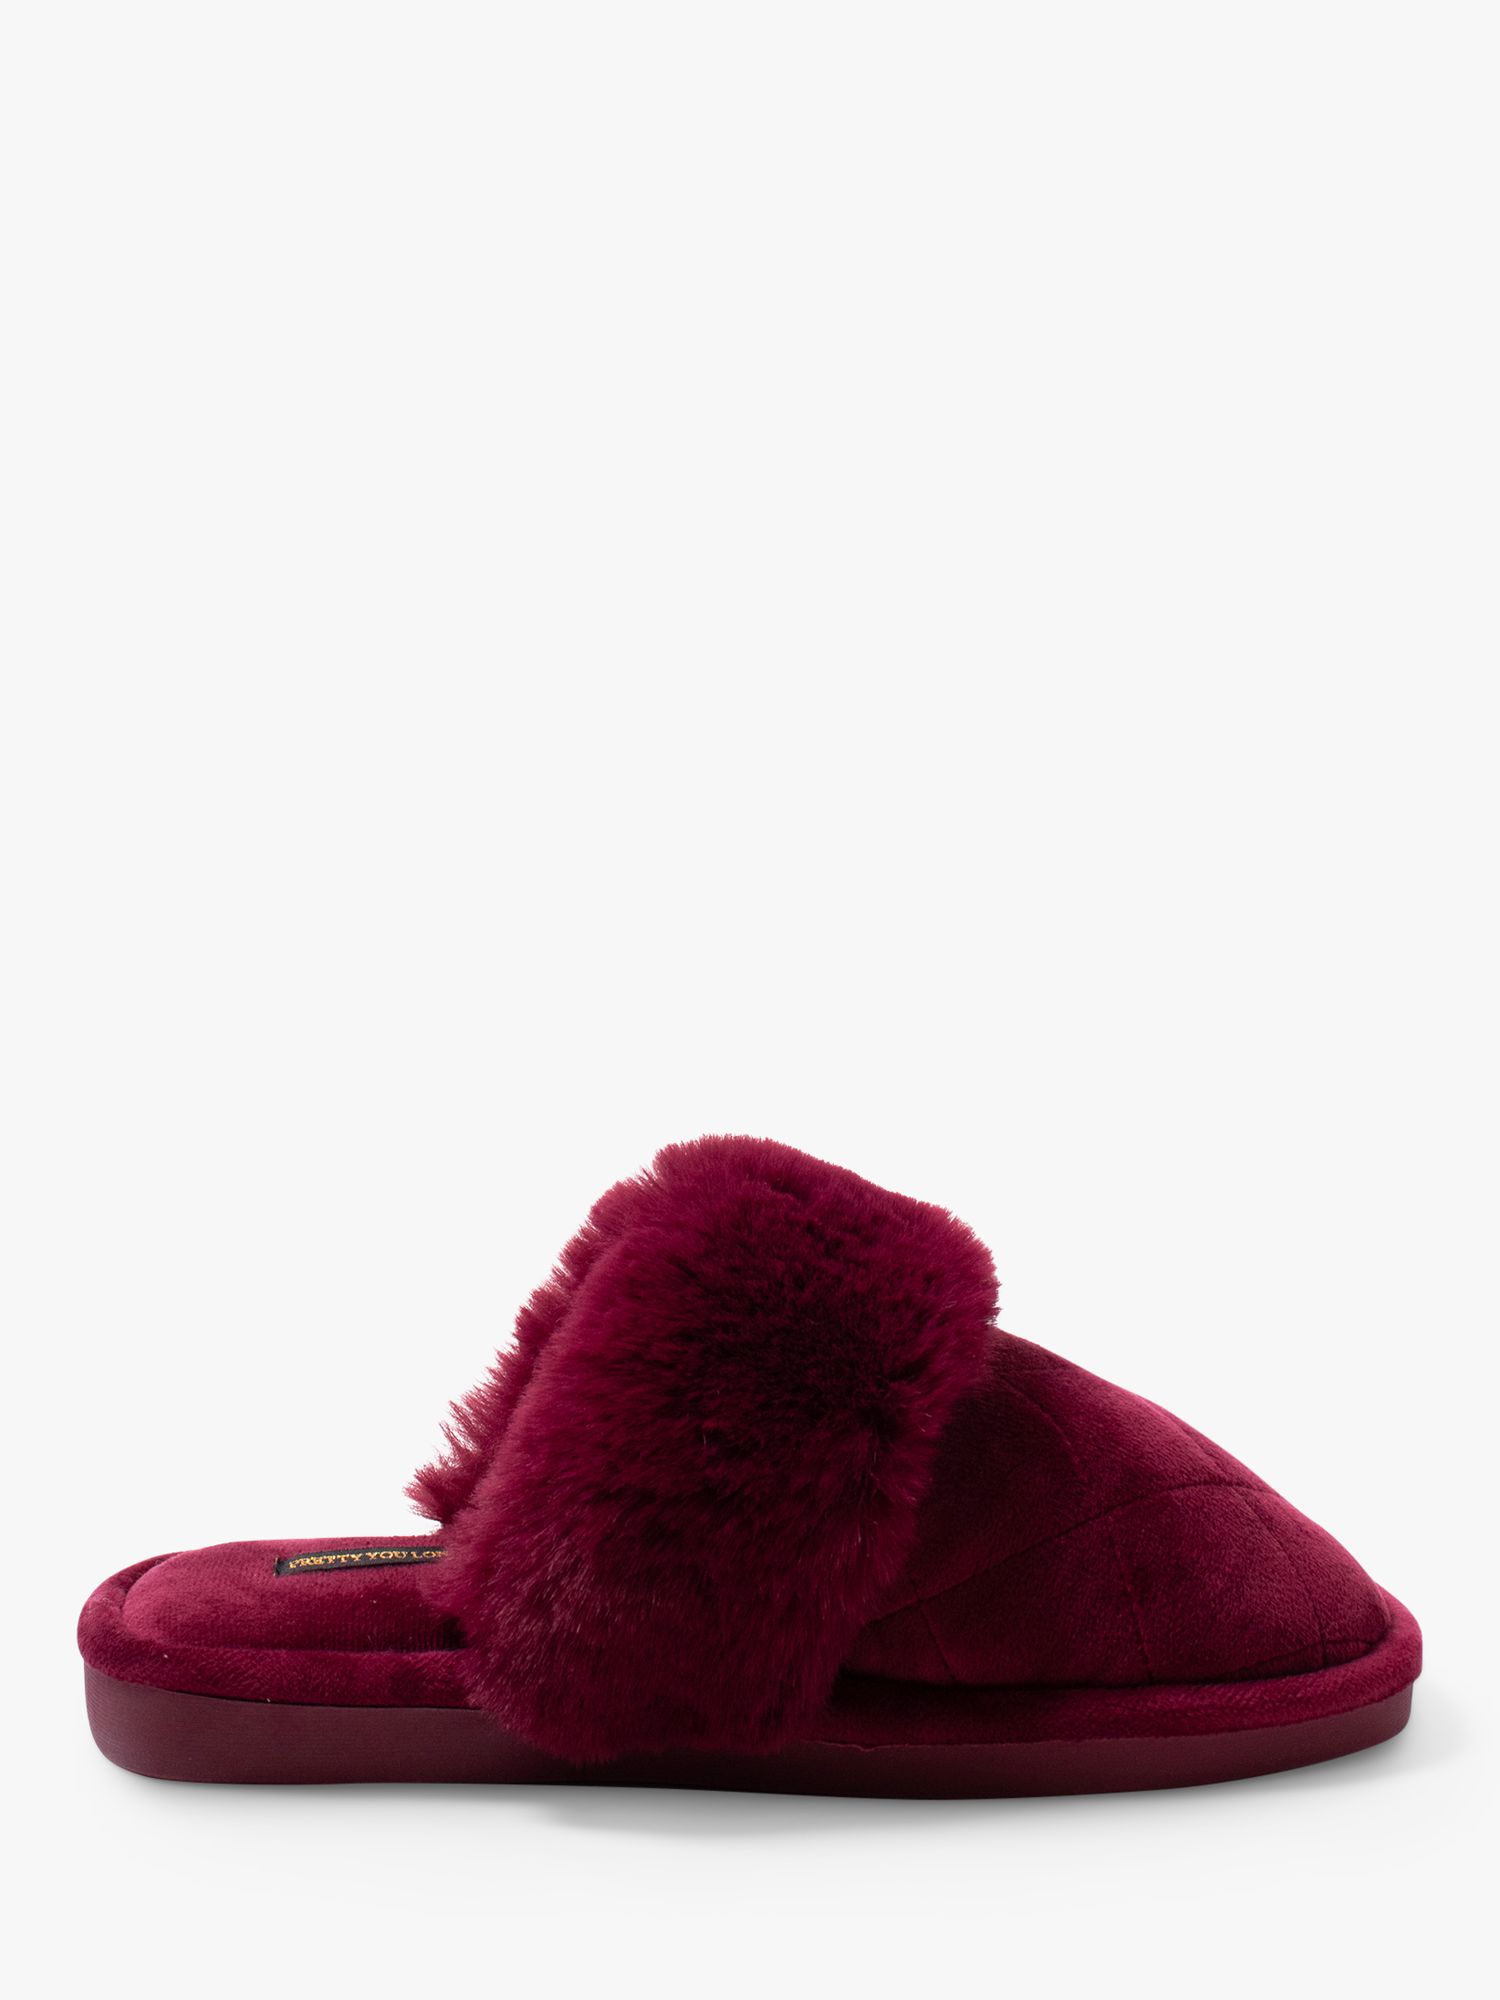 Pretty You London Gigi Quilted Mule Slippers, Bordeaux at John Lewis ...